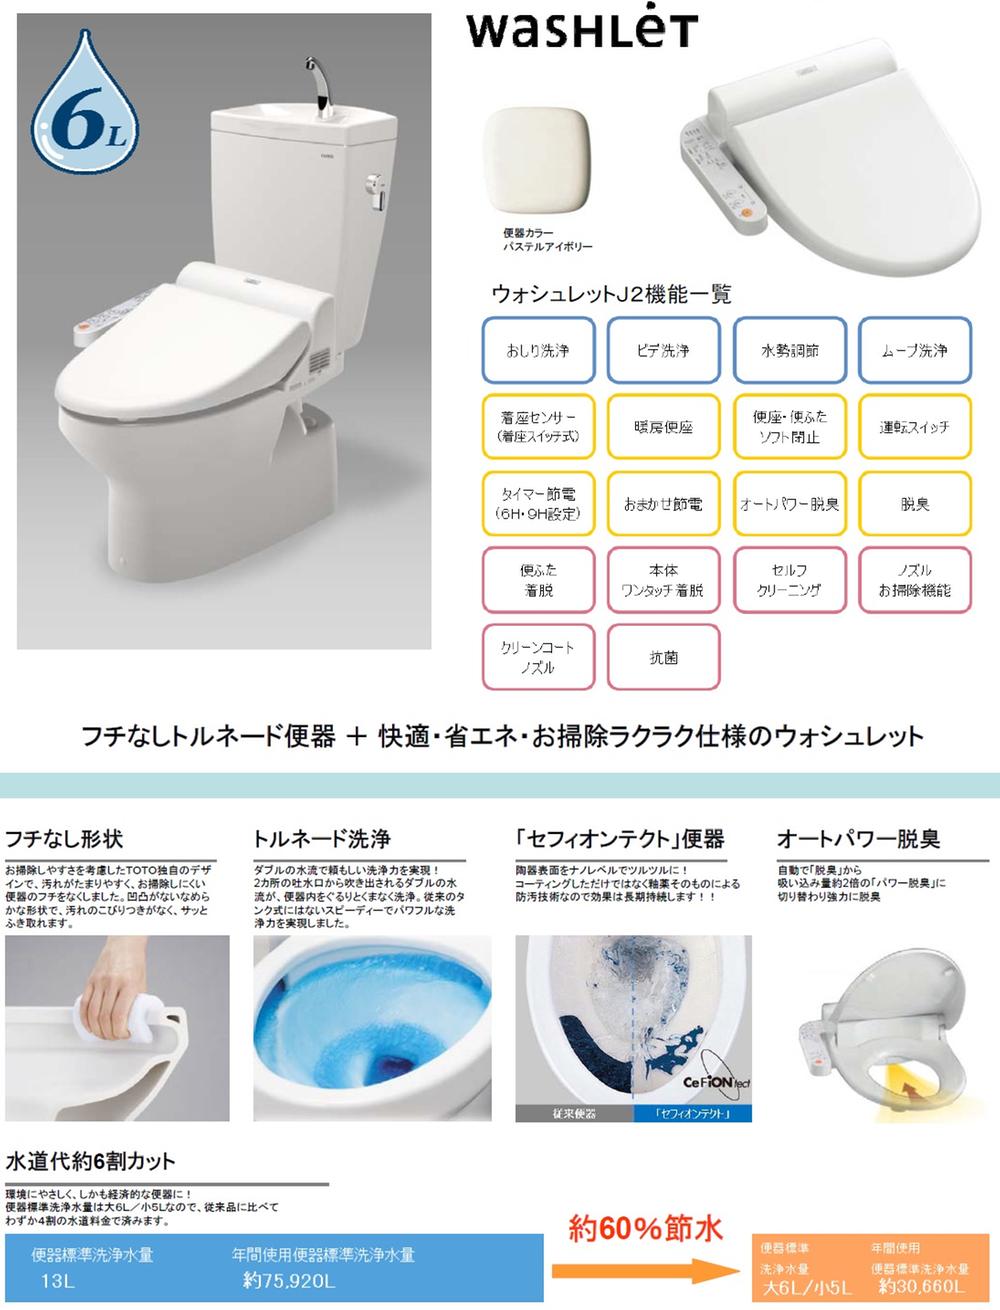 Other Equipment.  ■ Name TOTO made of toilet ■ caption ・ Borderless shape in consideration of the cleaning ease ・ Tornado cleaning to wash all over the inside of the toilet bowl in the double of water flow ・ The pottery surface was coated in slippery at the nano-level "Sefi on Detect" toilet bowl ・ Automatically from "deodorizing", Deodorizing in cooperation switches to suction weight of about 2 times the "power deodorizing"